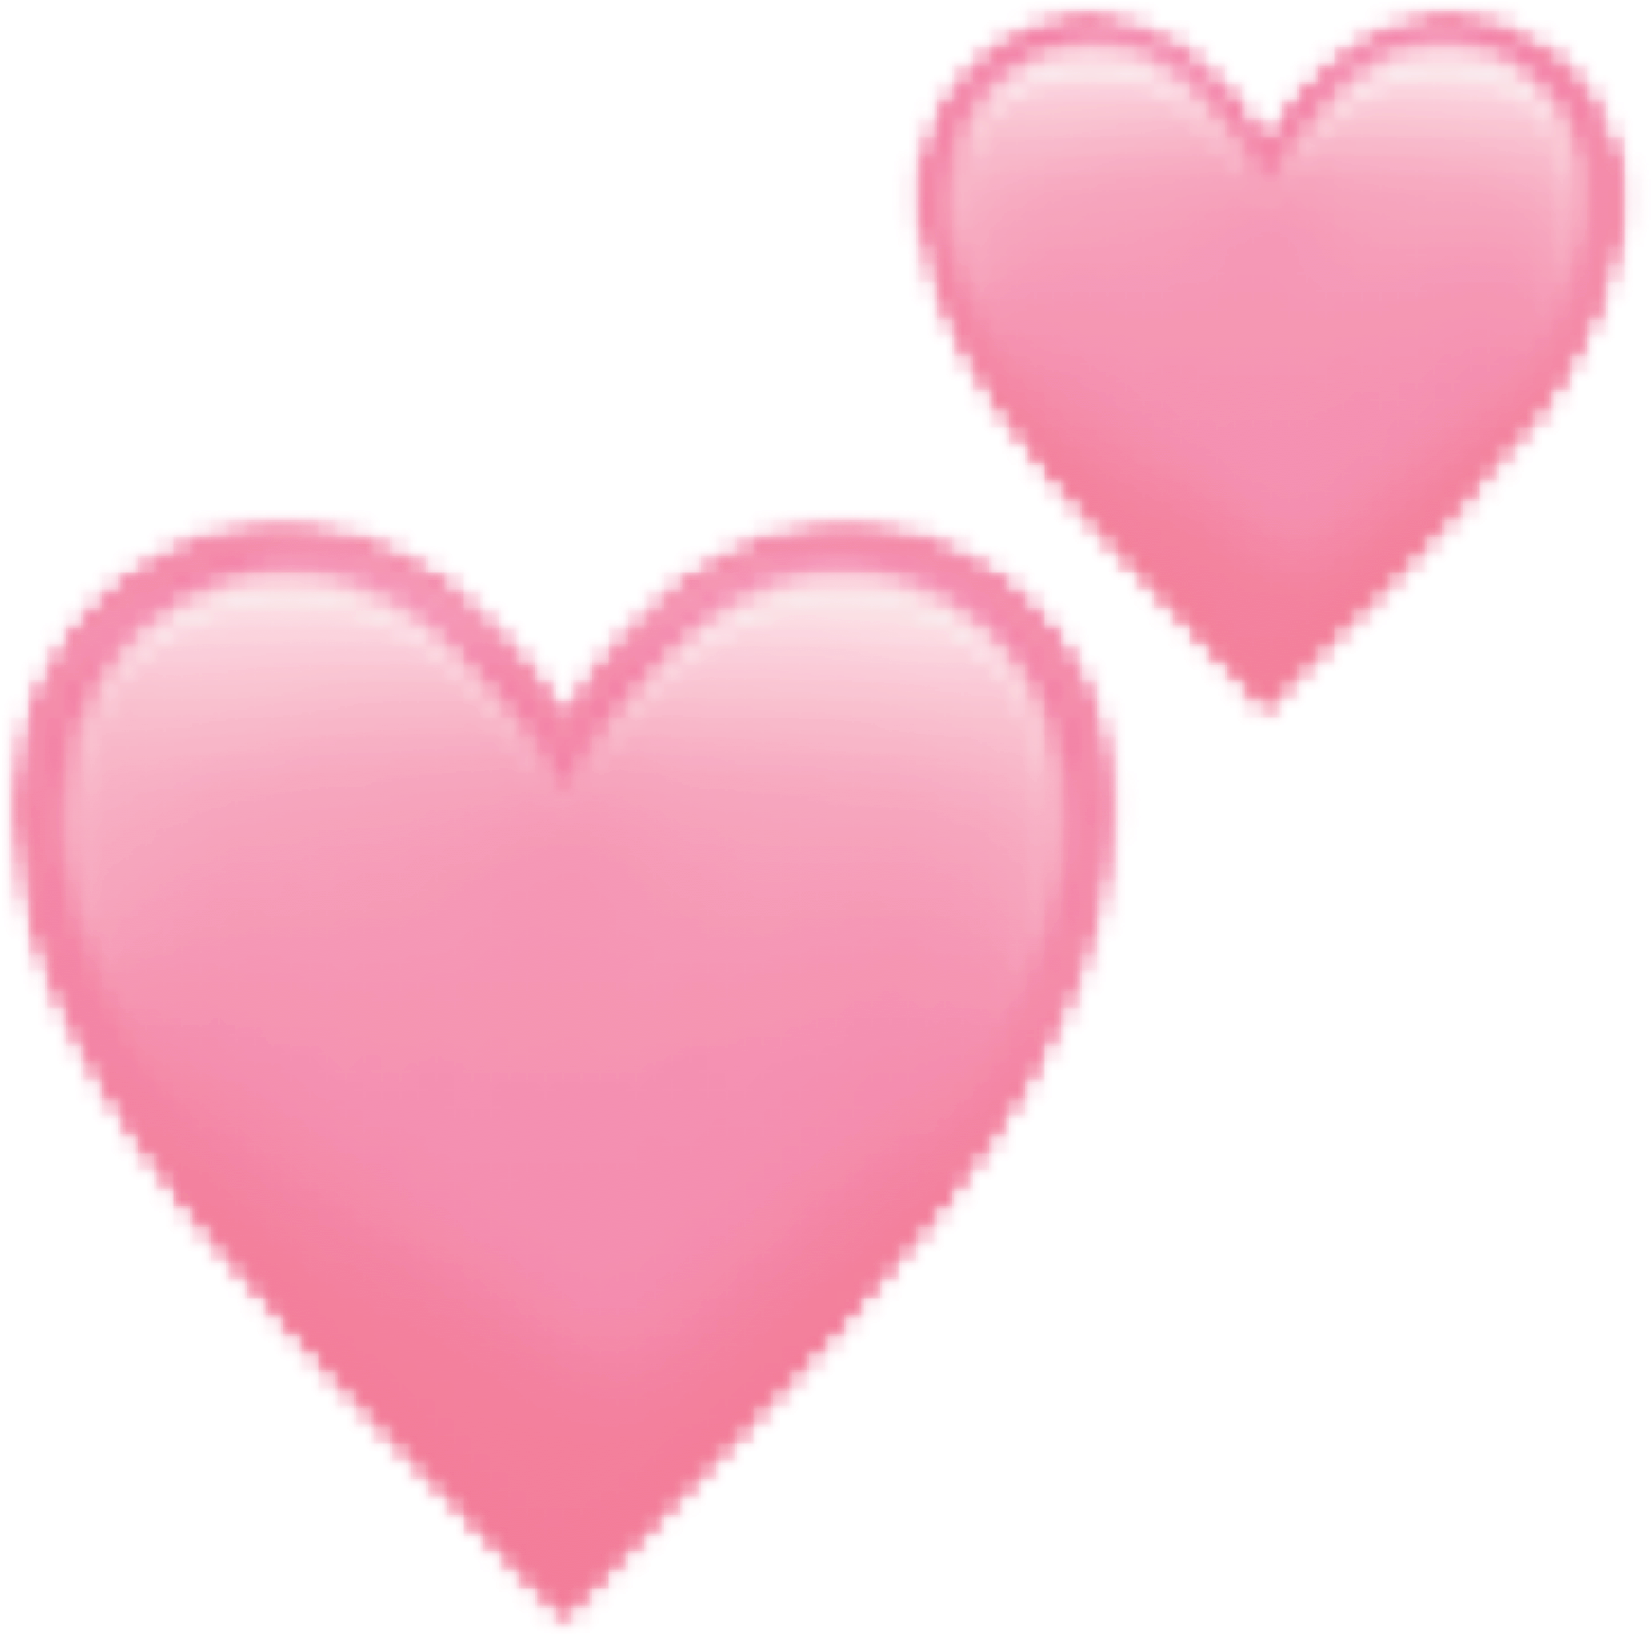 Aesthetic Heart PNG Background